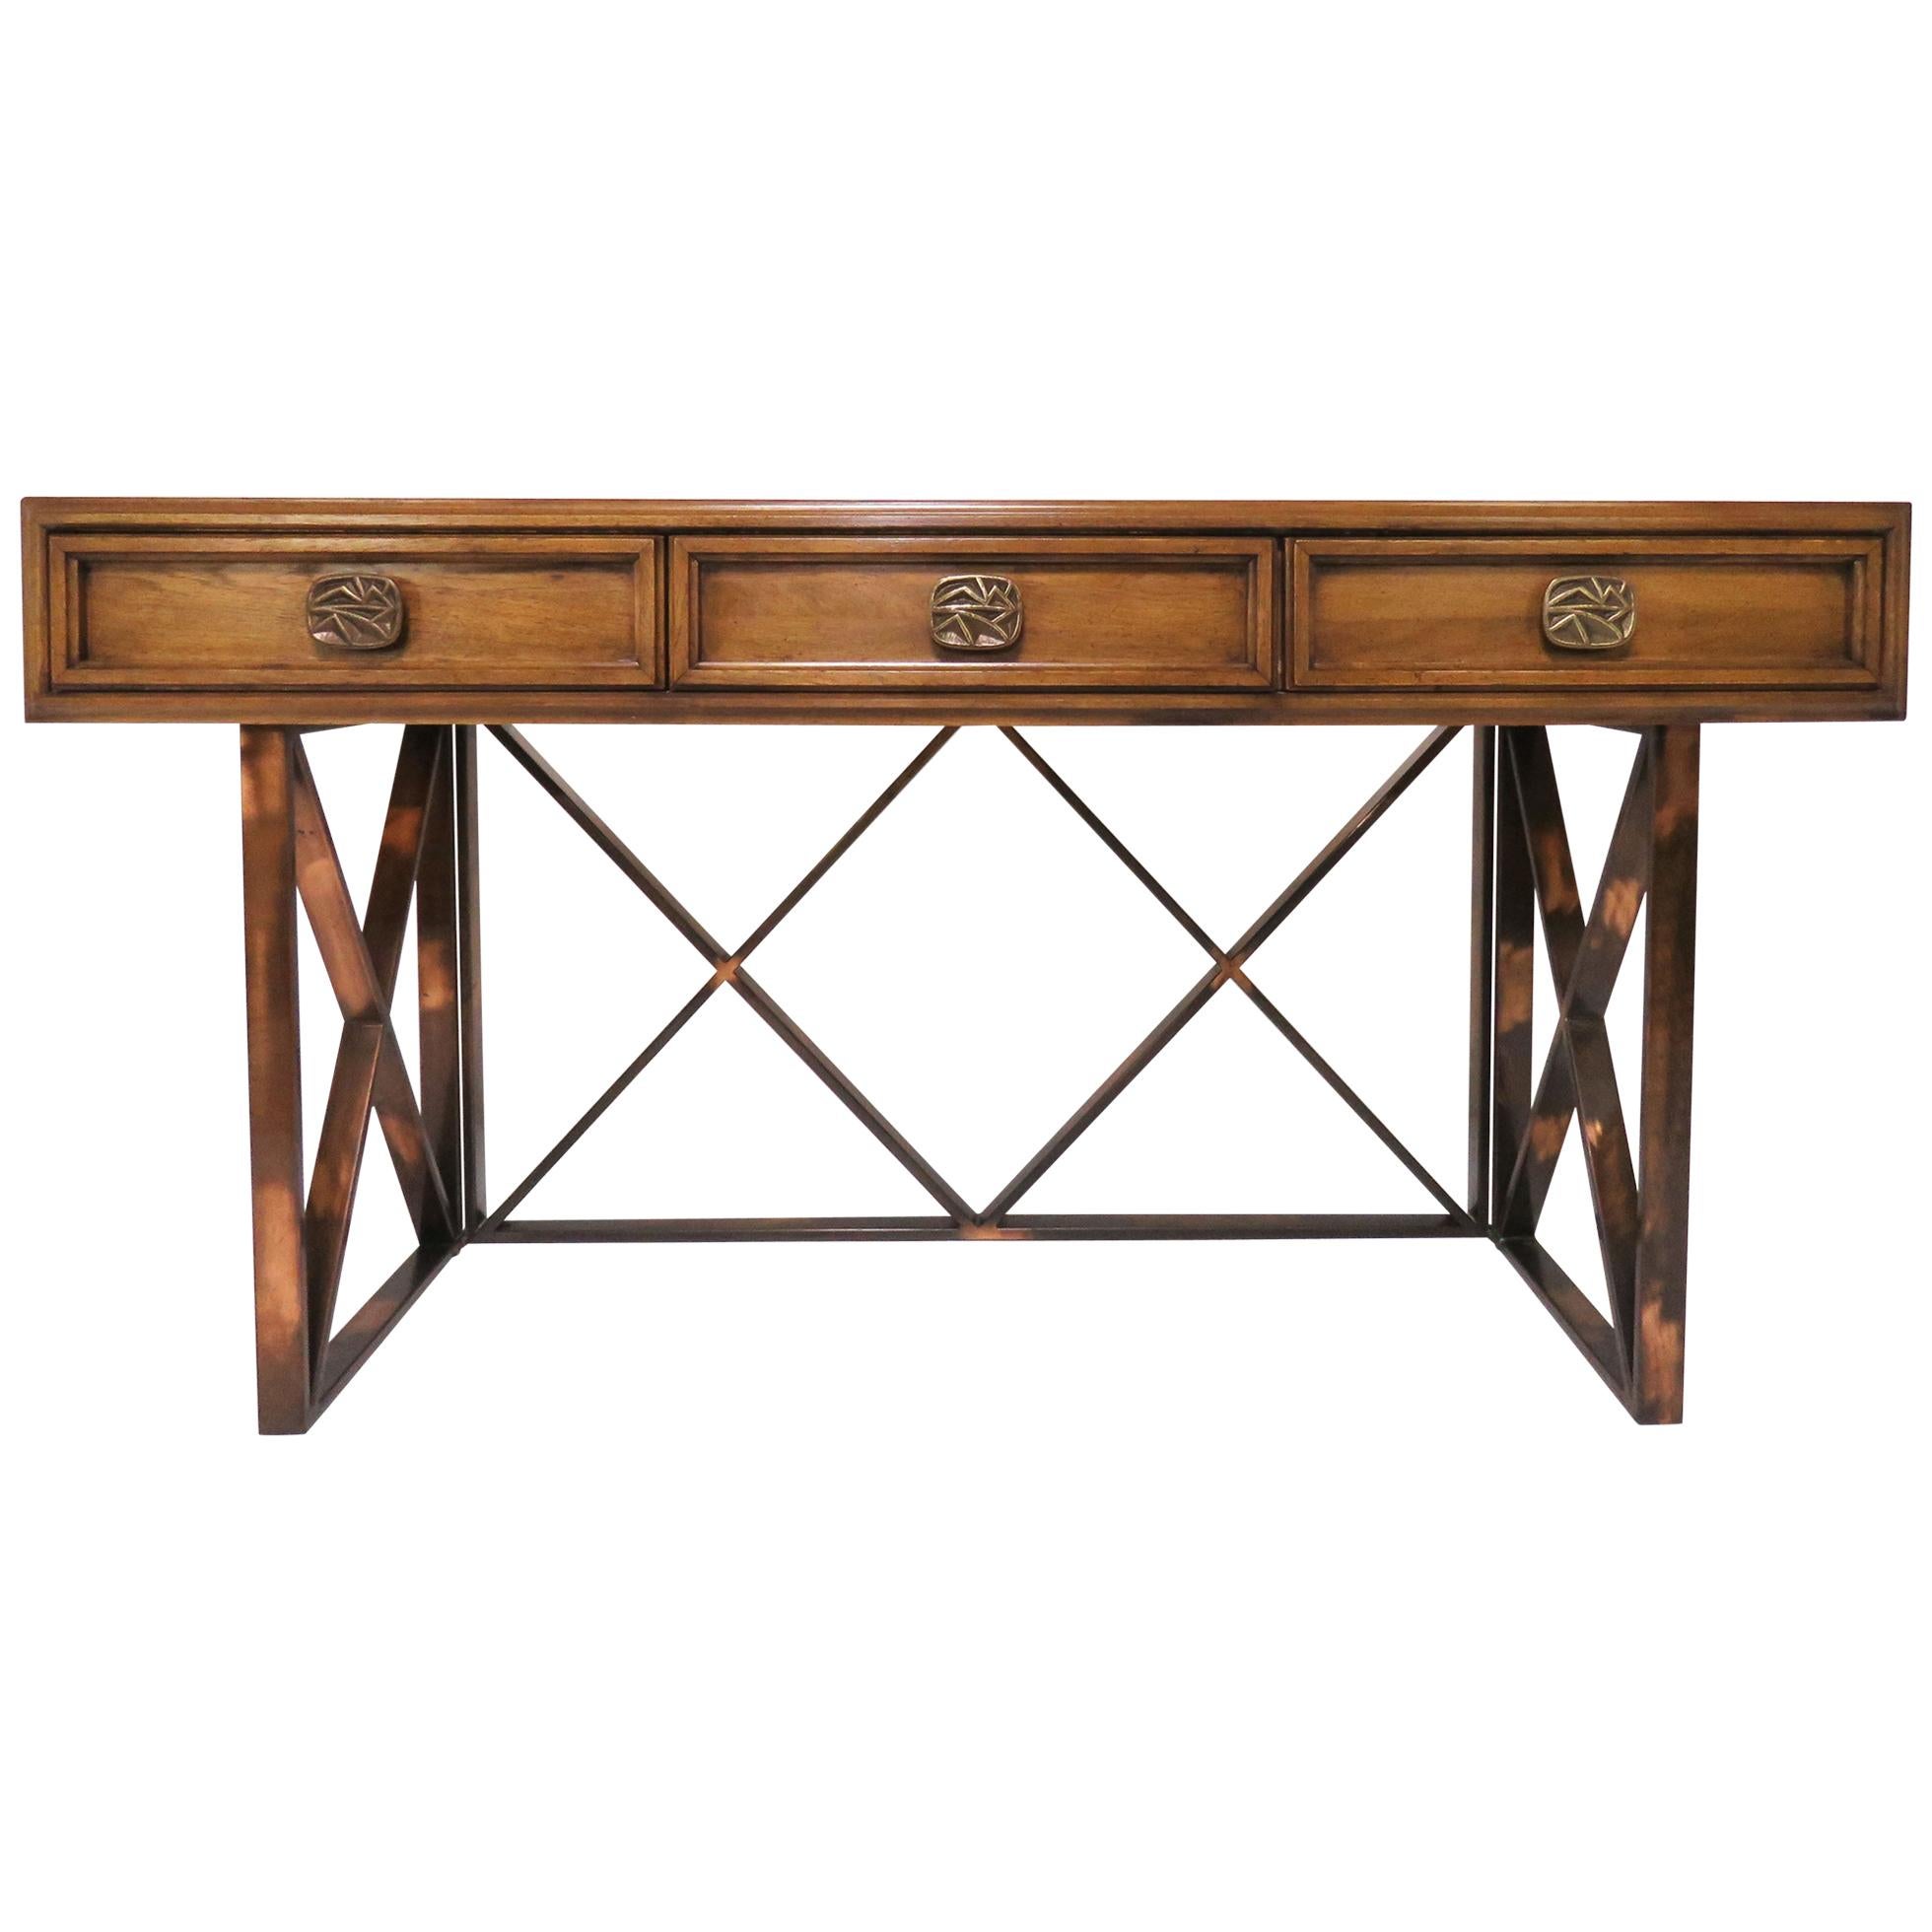 Midcentury Walnut Console or Writing Table with X-Form Bronzed Base, circa 1970s